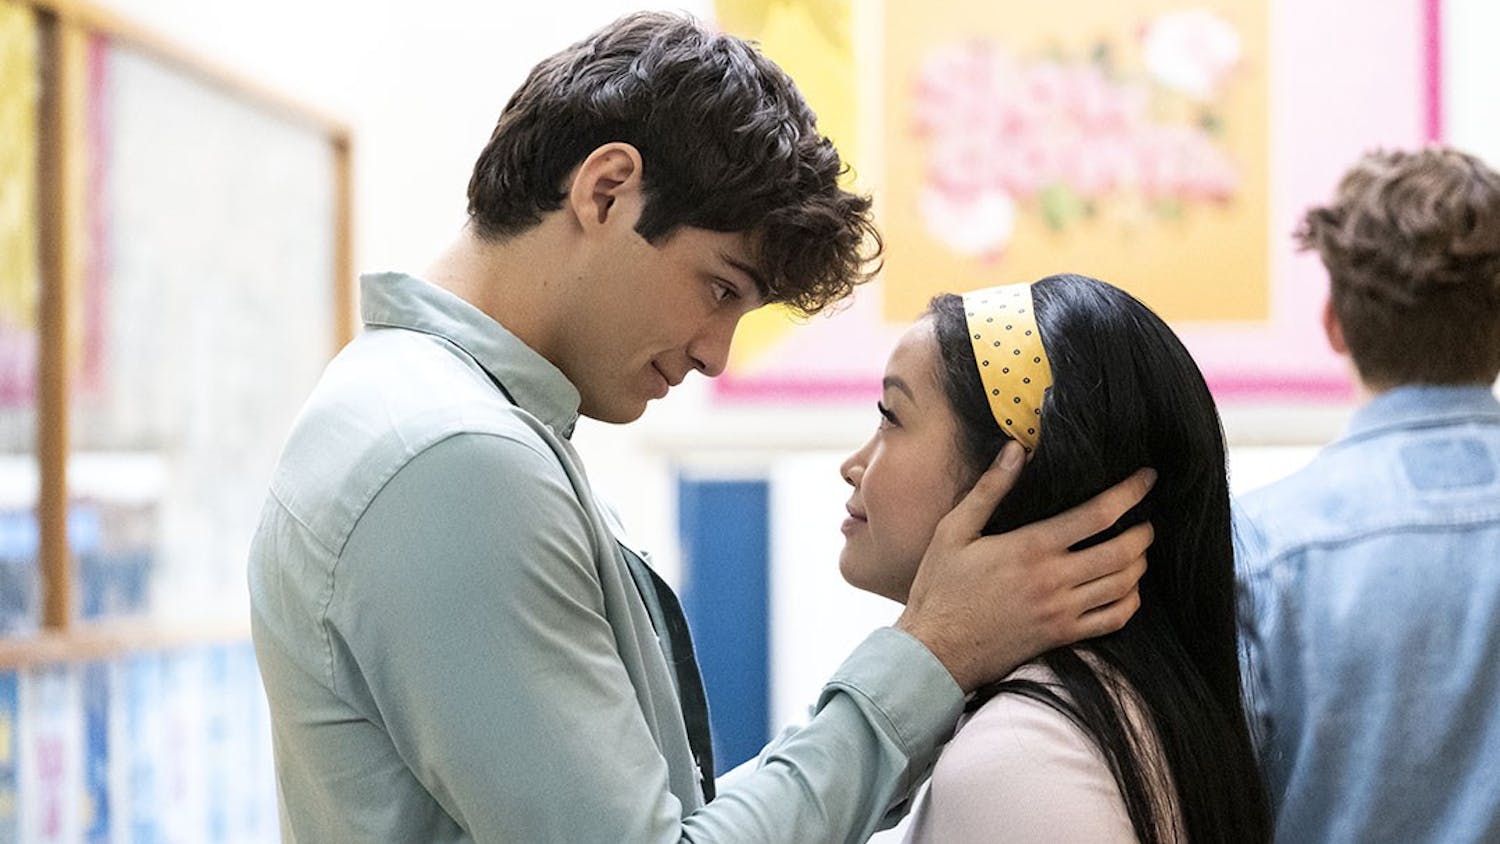 Noah Centineo and Lana Condor play main characters in the "To All the Boys I've Loved Before" Netflix movie series.&nbsp;